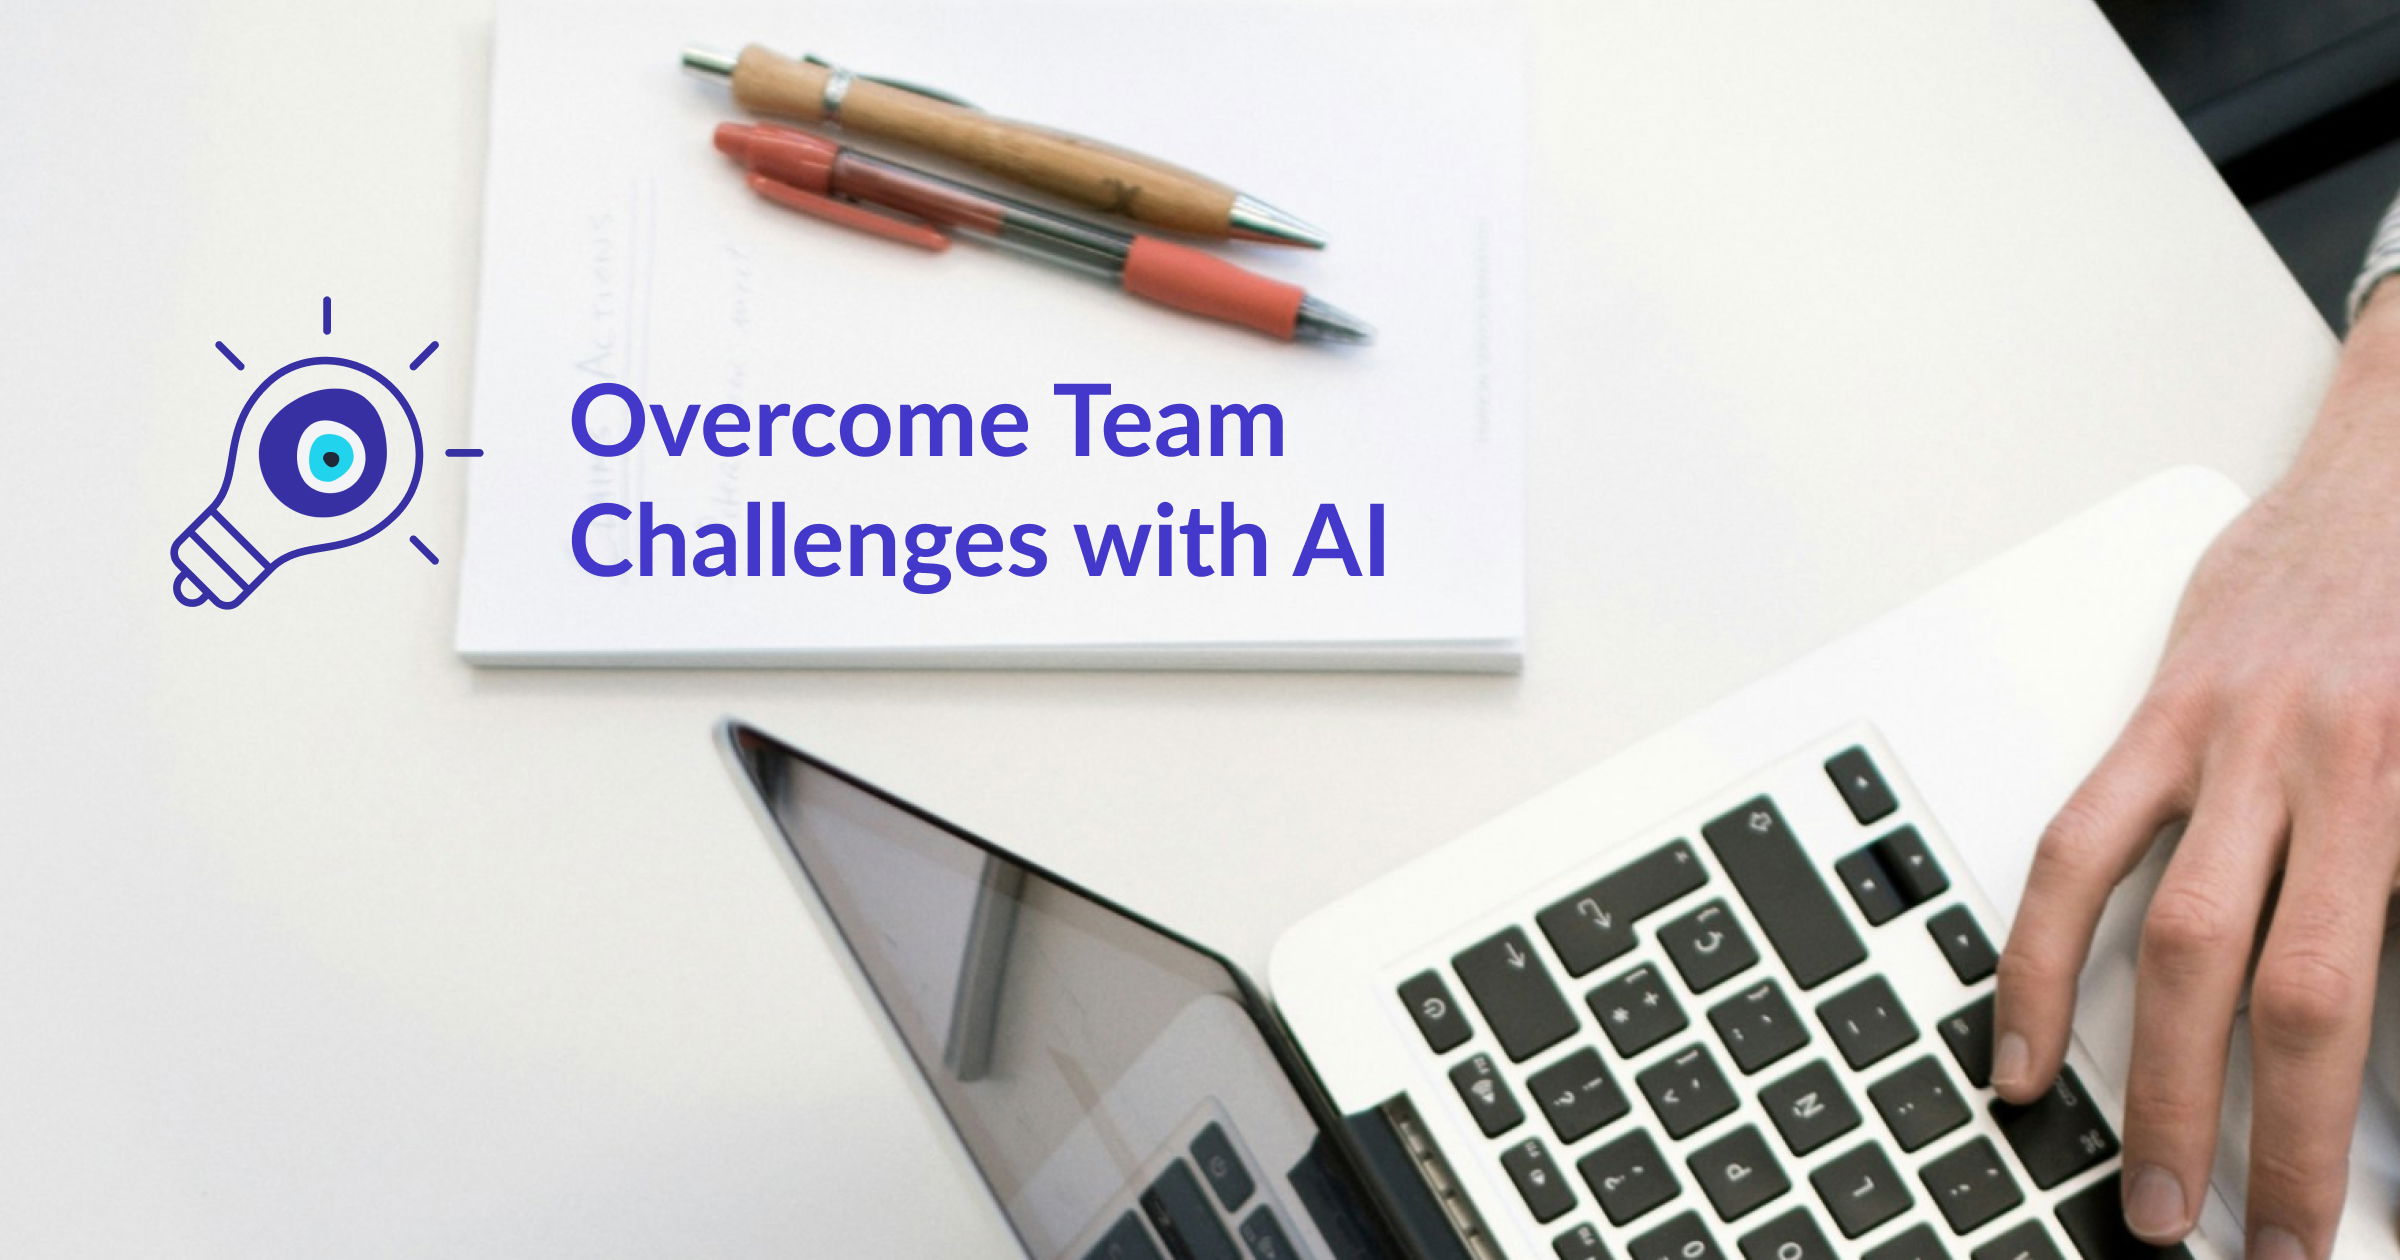 Text saying "Overcome team challenges with AI" and a top view of desk with a computer, a notepad and some pens